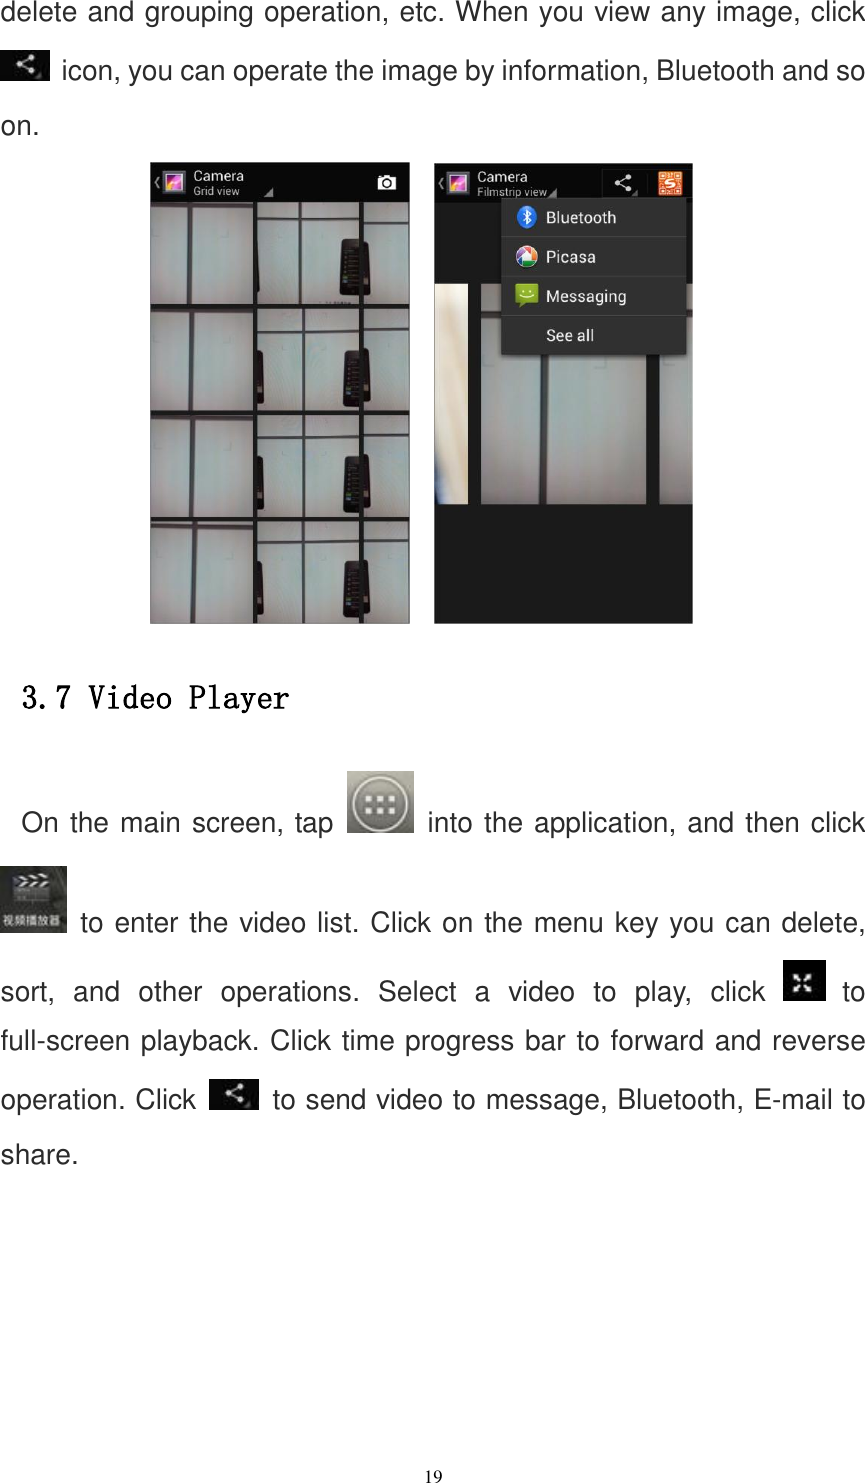   19 delete and grouping operation, etc. When you view any image, click  icon, you can operate the image by information, Bluetooth and so on.     3.7 Video Player On the main screen, tap    into the application, and then click   to enter the video list. Click on the menu key you can delete, sort,  and  other  operations.  Select  a  video  to  play,  click   to full-screen playback. Click time progress bar to forward and reverse operation. Click    to send video to message, Bluetooth, E-mail to share. 